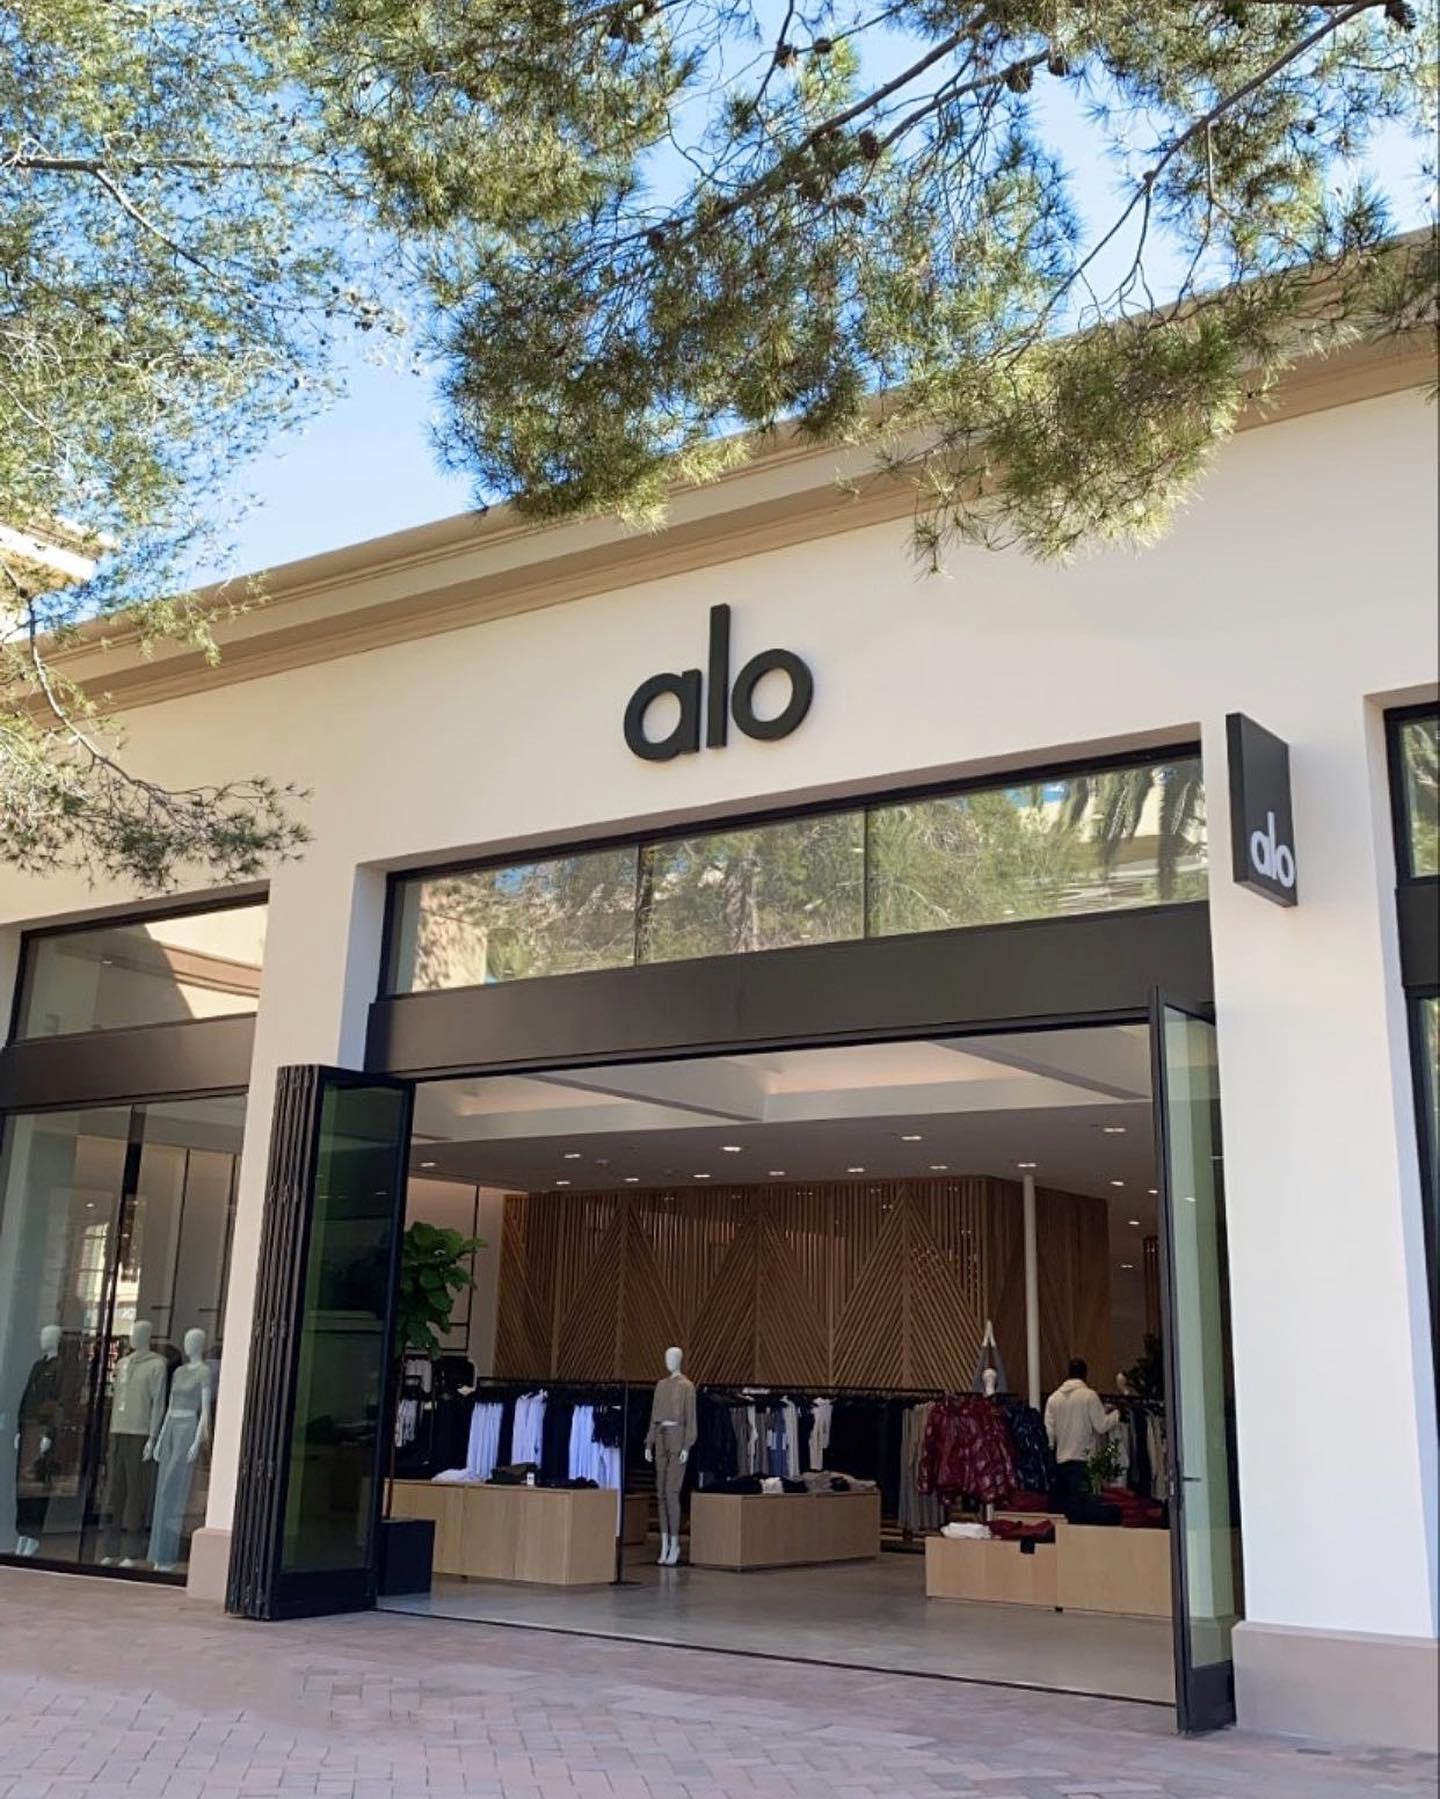 Alo Yoga Breaks into the Asian Market with First Flagship Store in